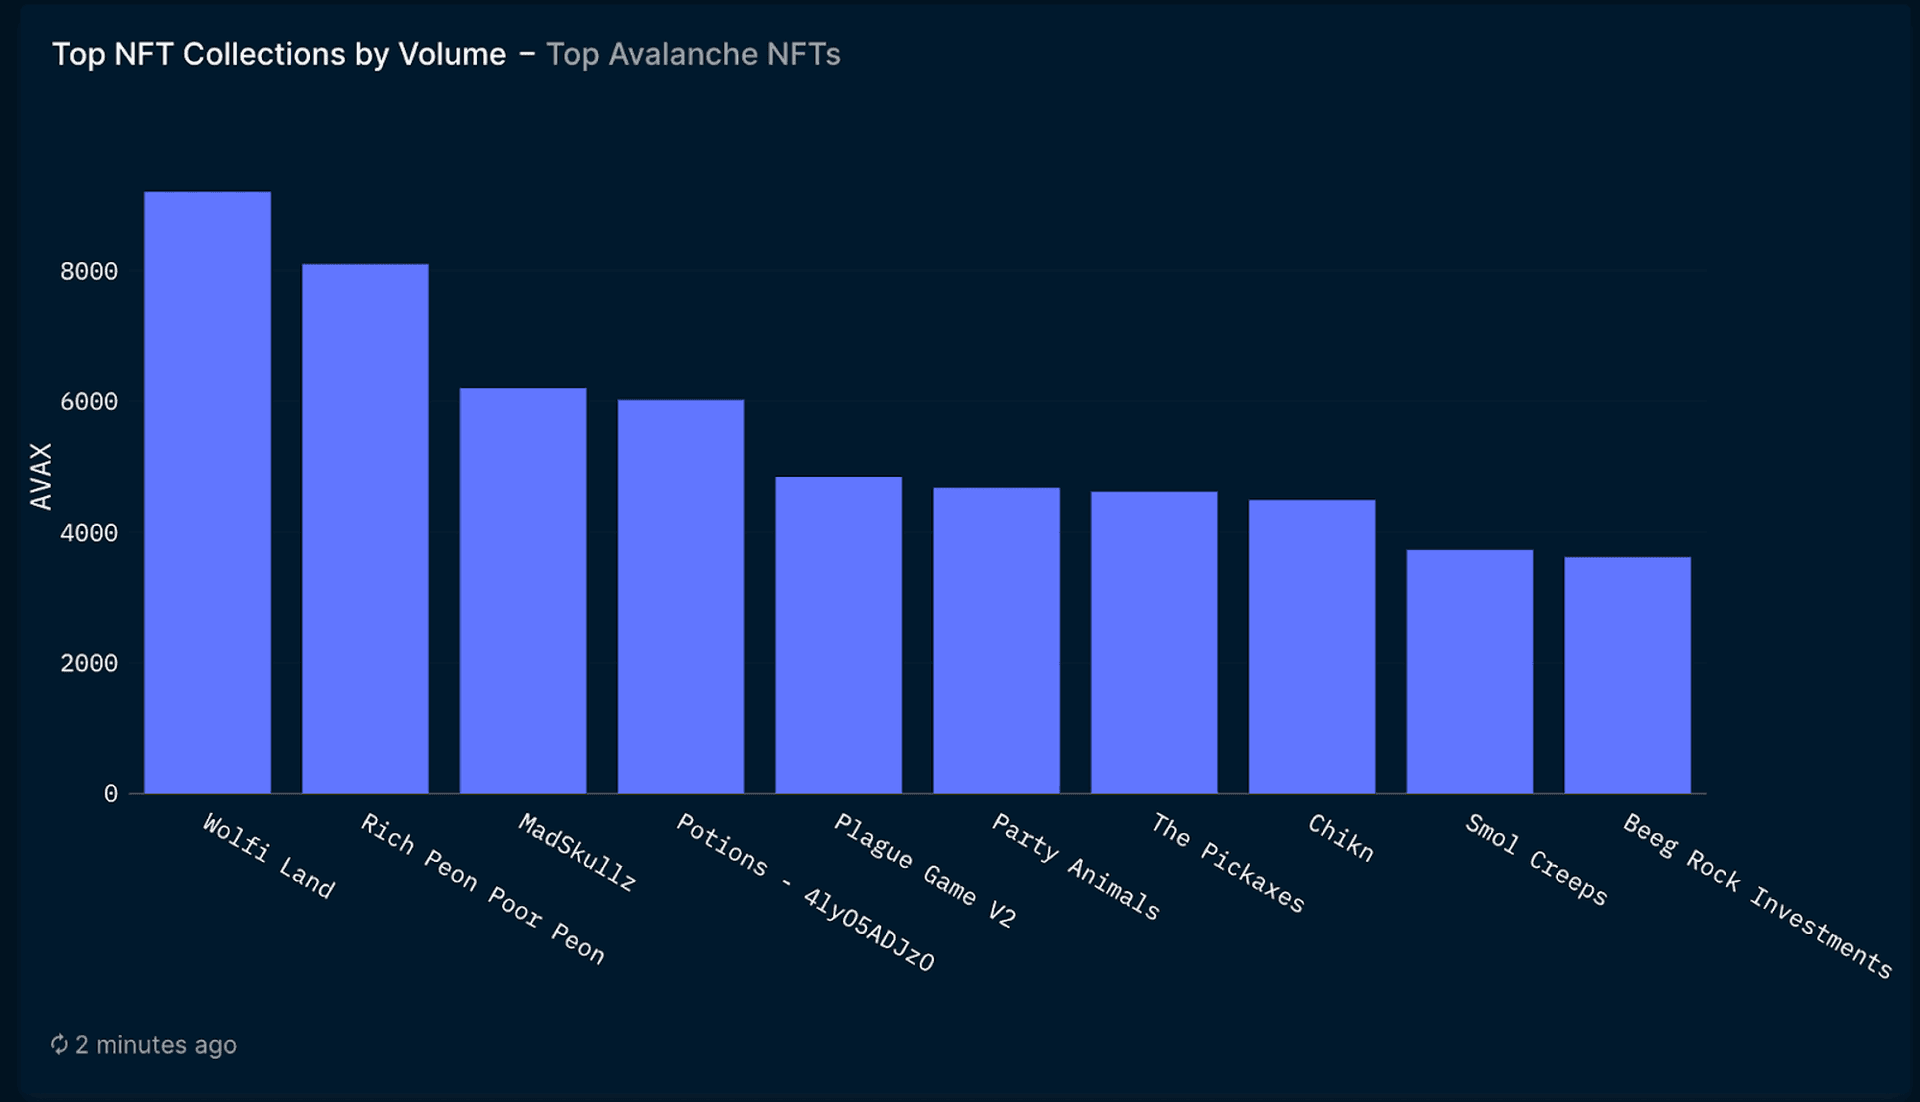 Top NFT Collections on Avalanche, Source: Nansen Query